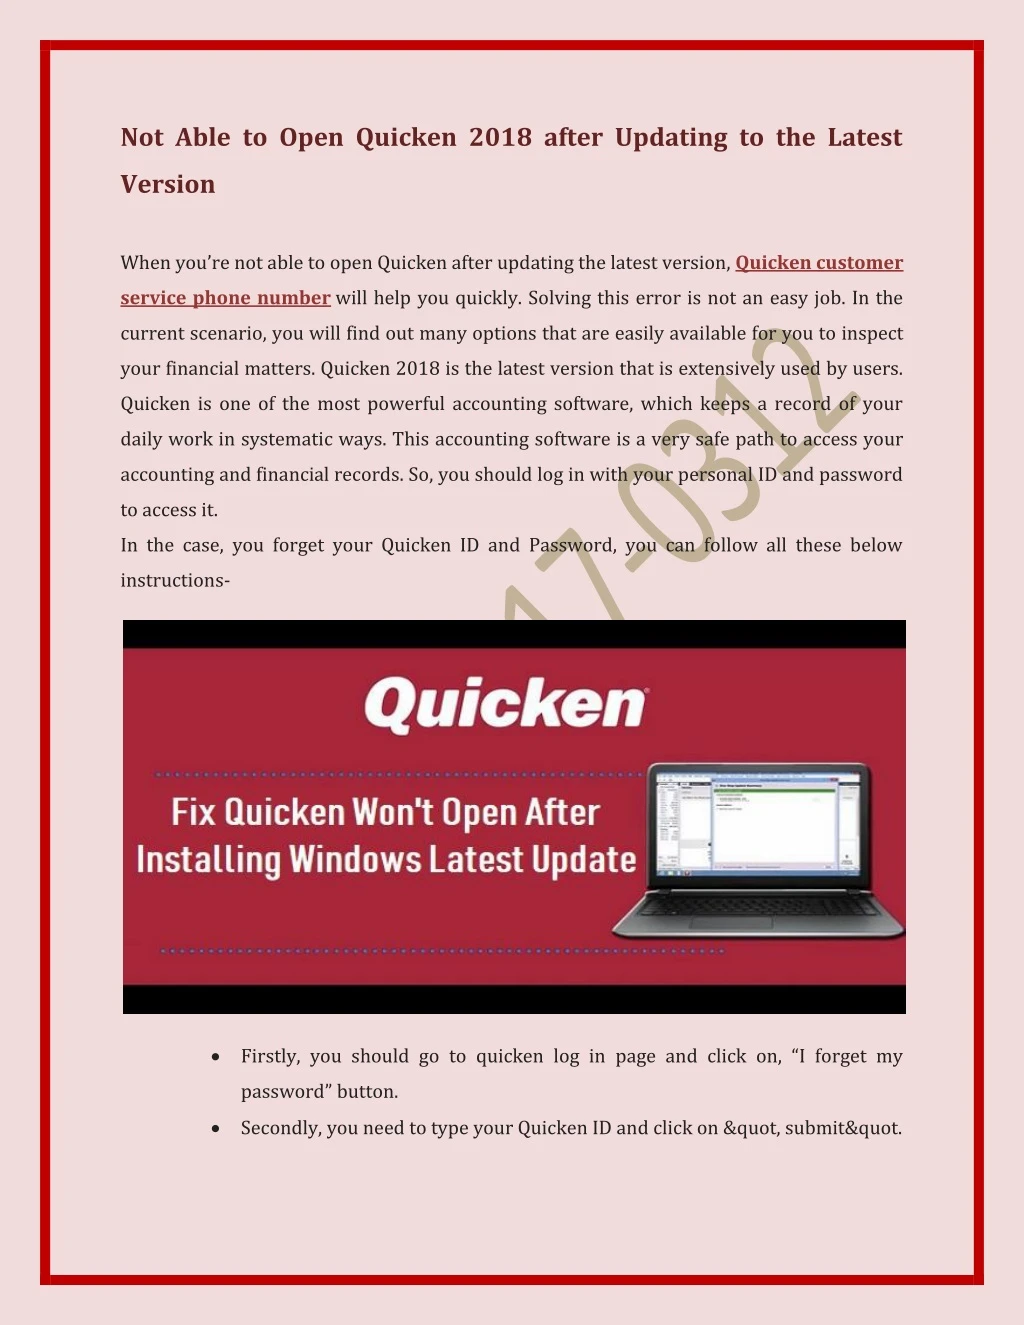 PPT Not Able to Open Quicken 2018 after Updating to the Latest